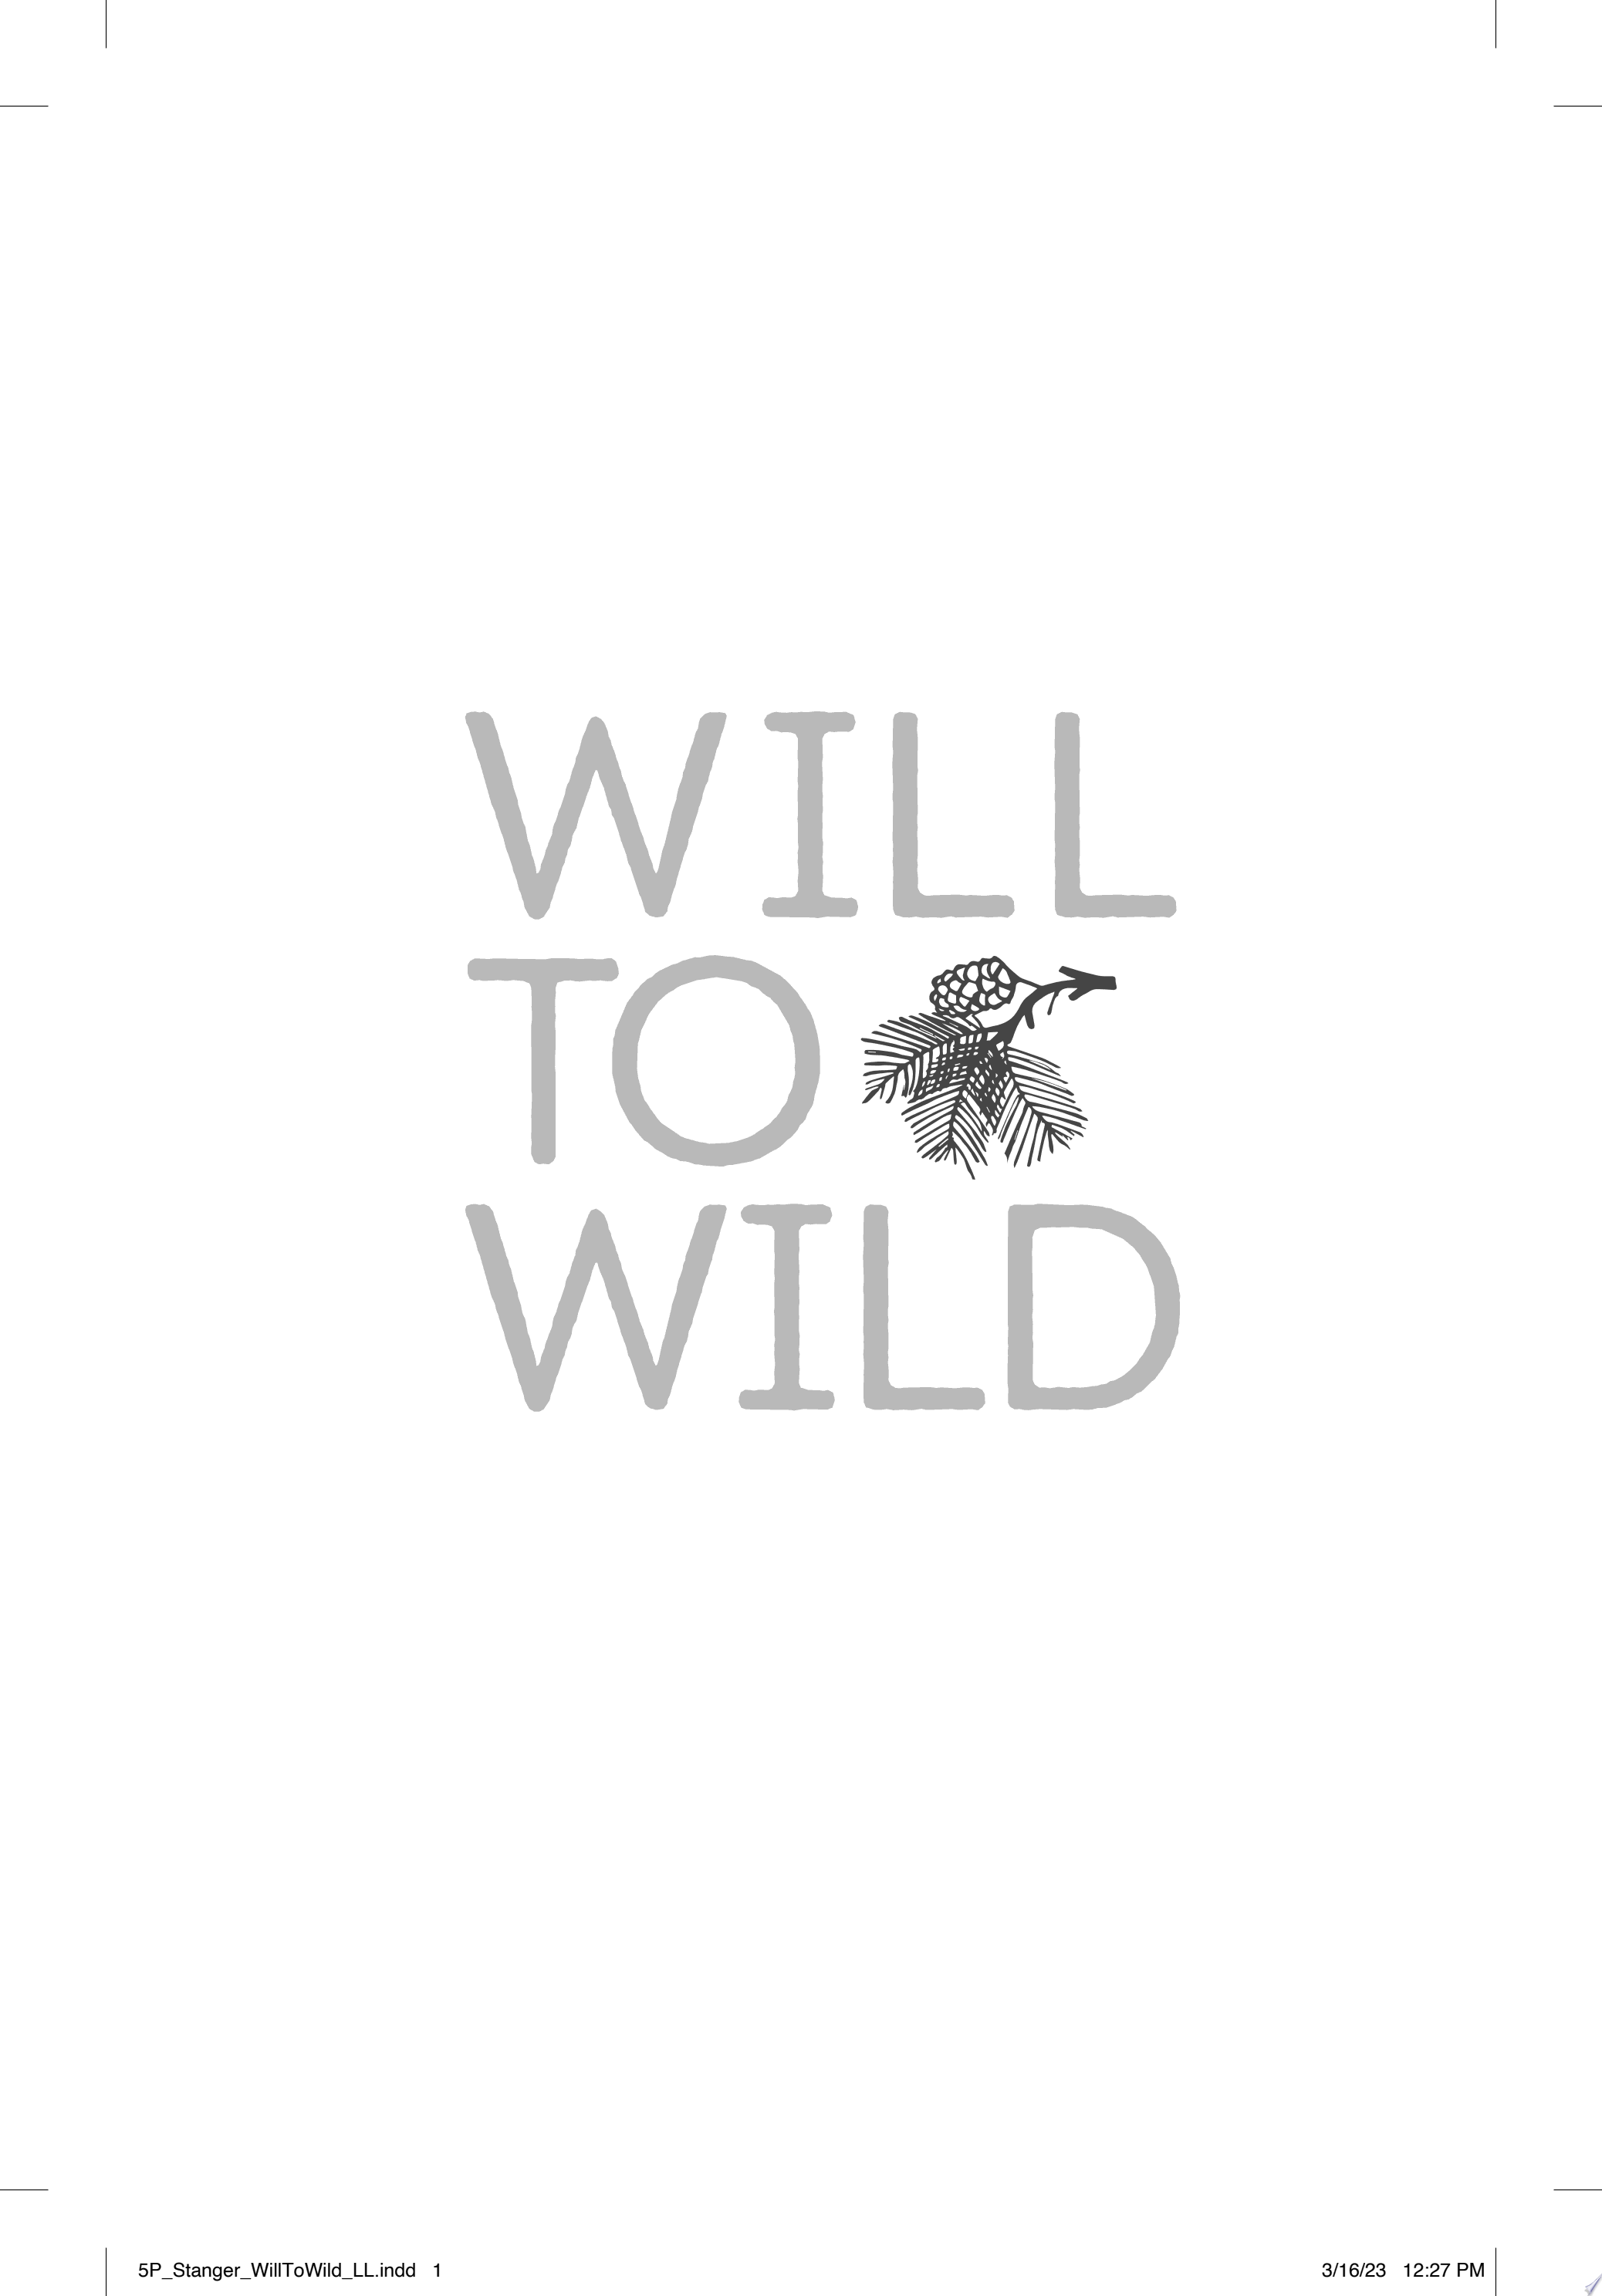 Image for "Will to Wild"